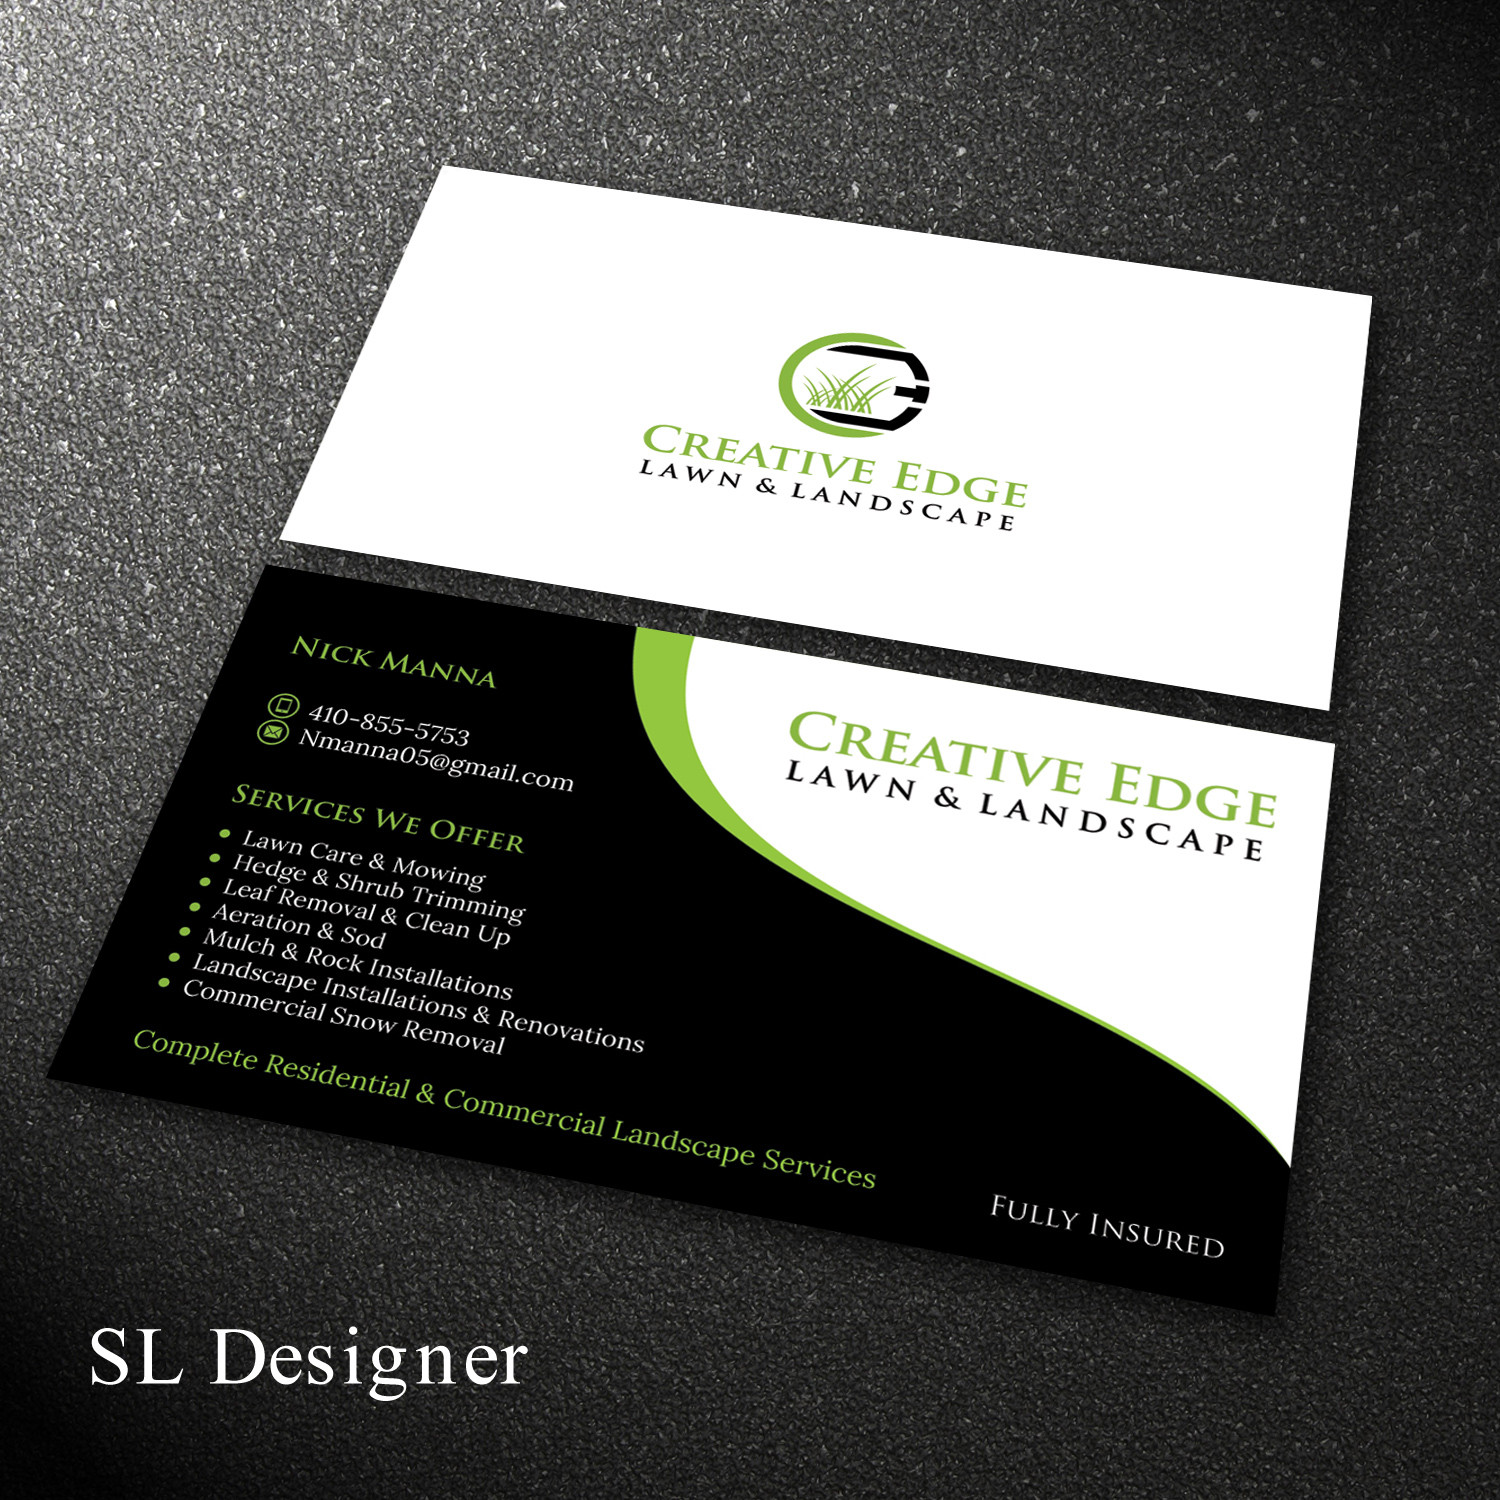 Landscaping Business Cards Templates Free Sample Kit Maker Of Free Business Card Templates Online